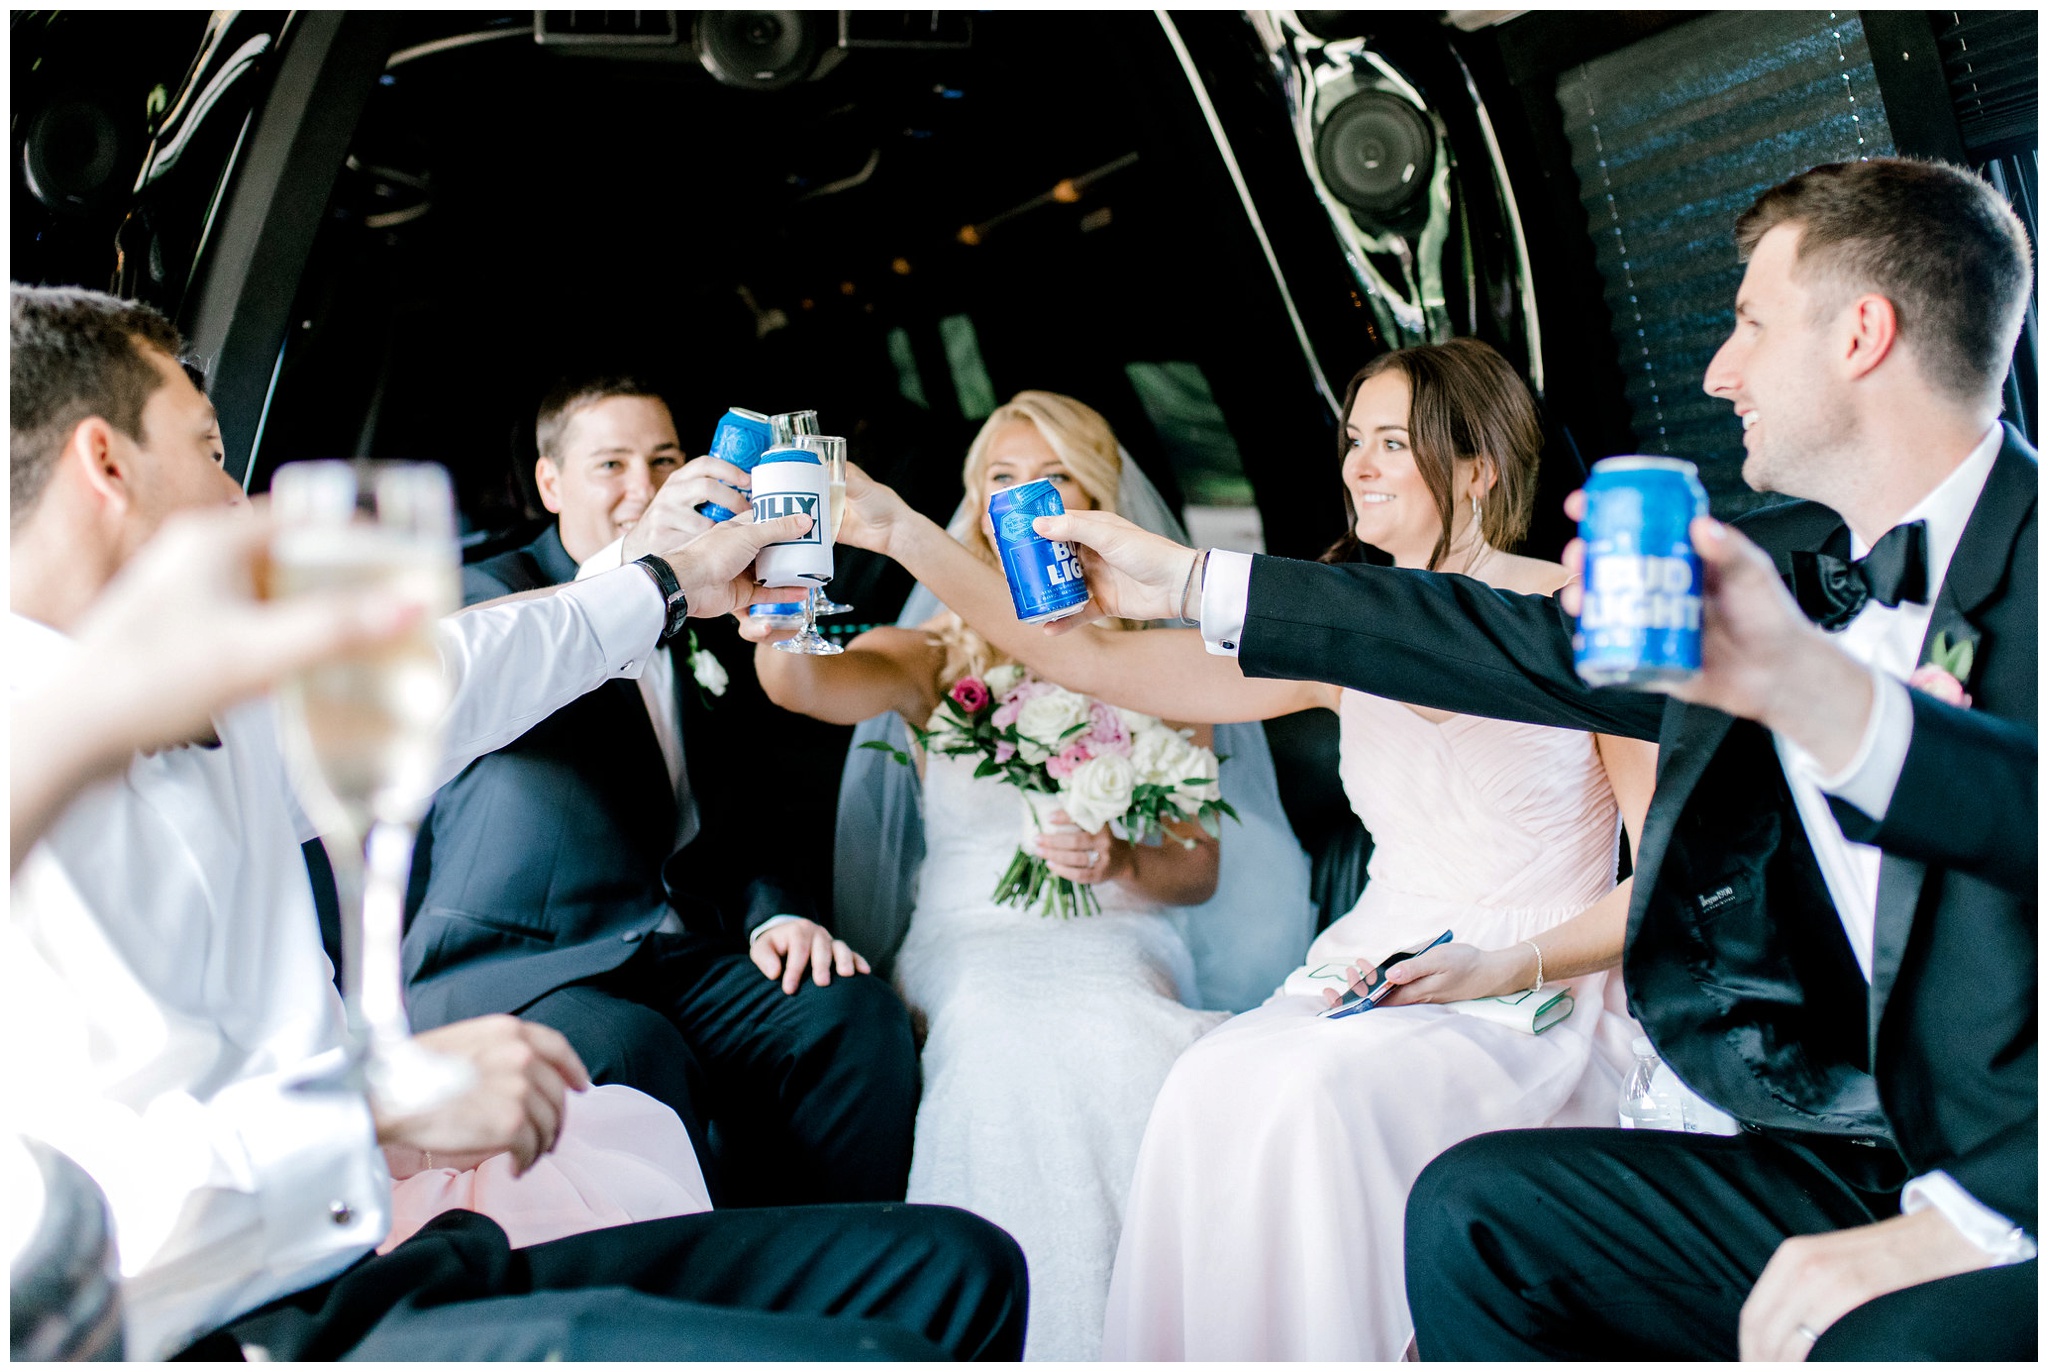 Dilly Dilly Wedding Bud Light in Limo